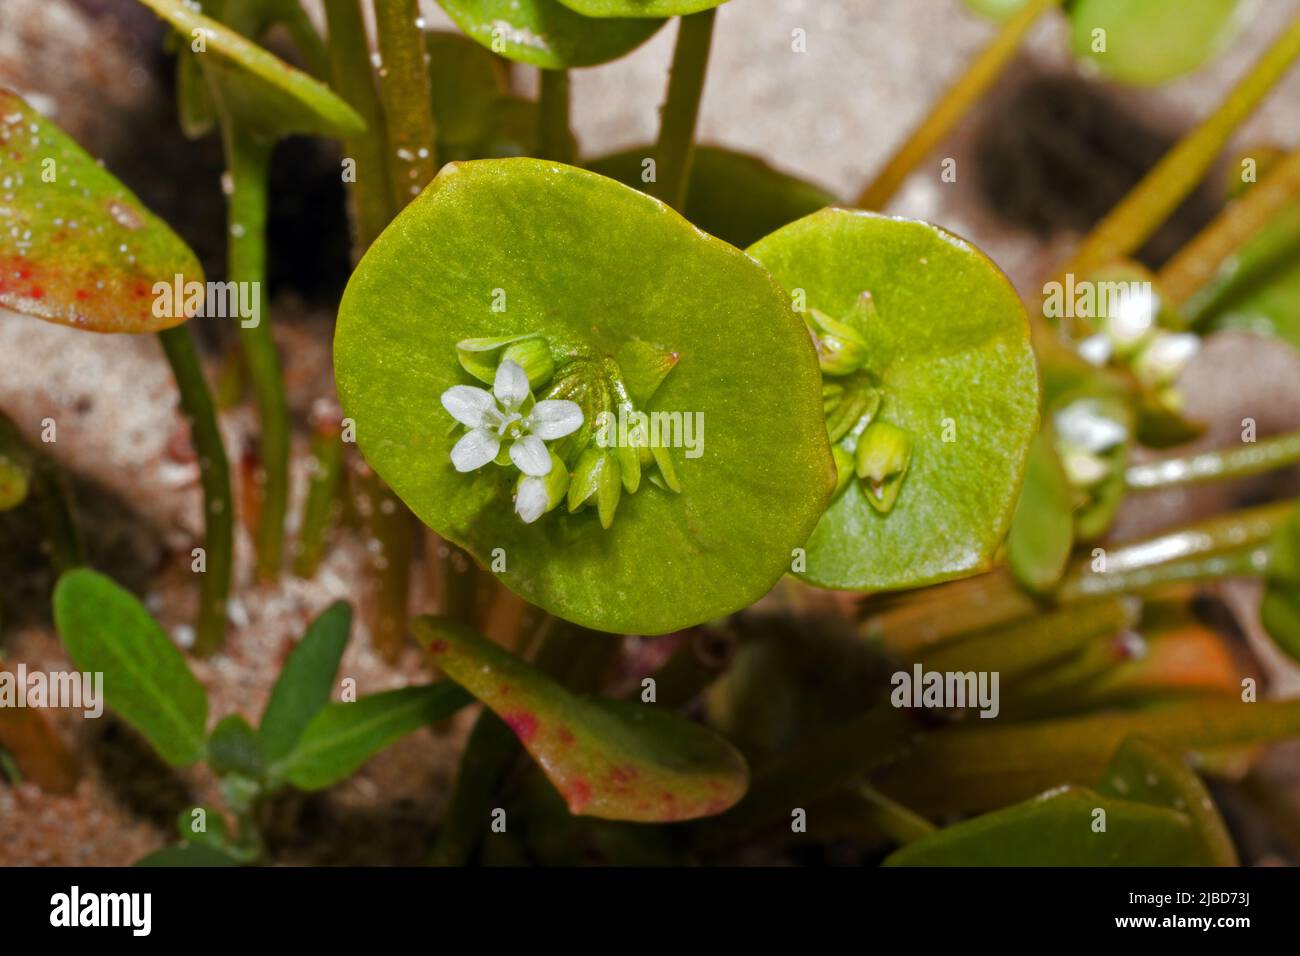 Claytonia perfoliata (miner's lettuce) is an edible, fleshy, herbaceous, annual native to western regions of North America. Stock Photo